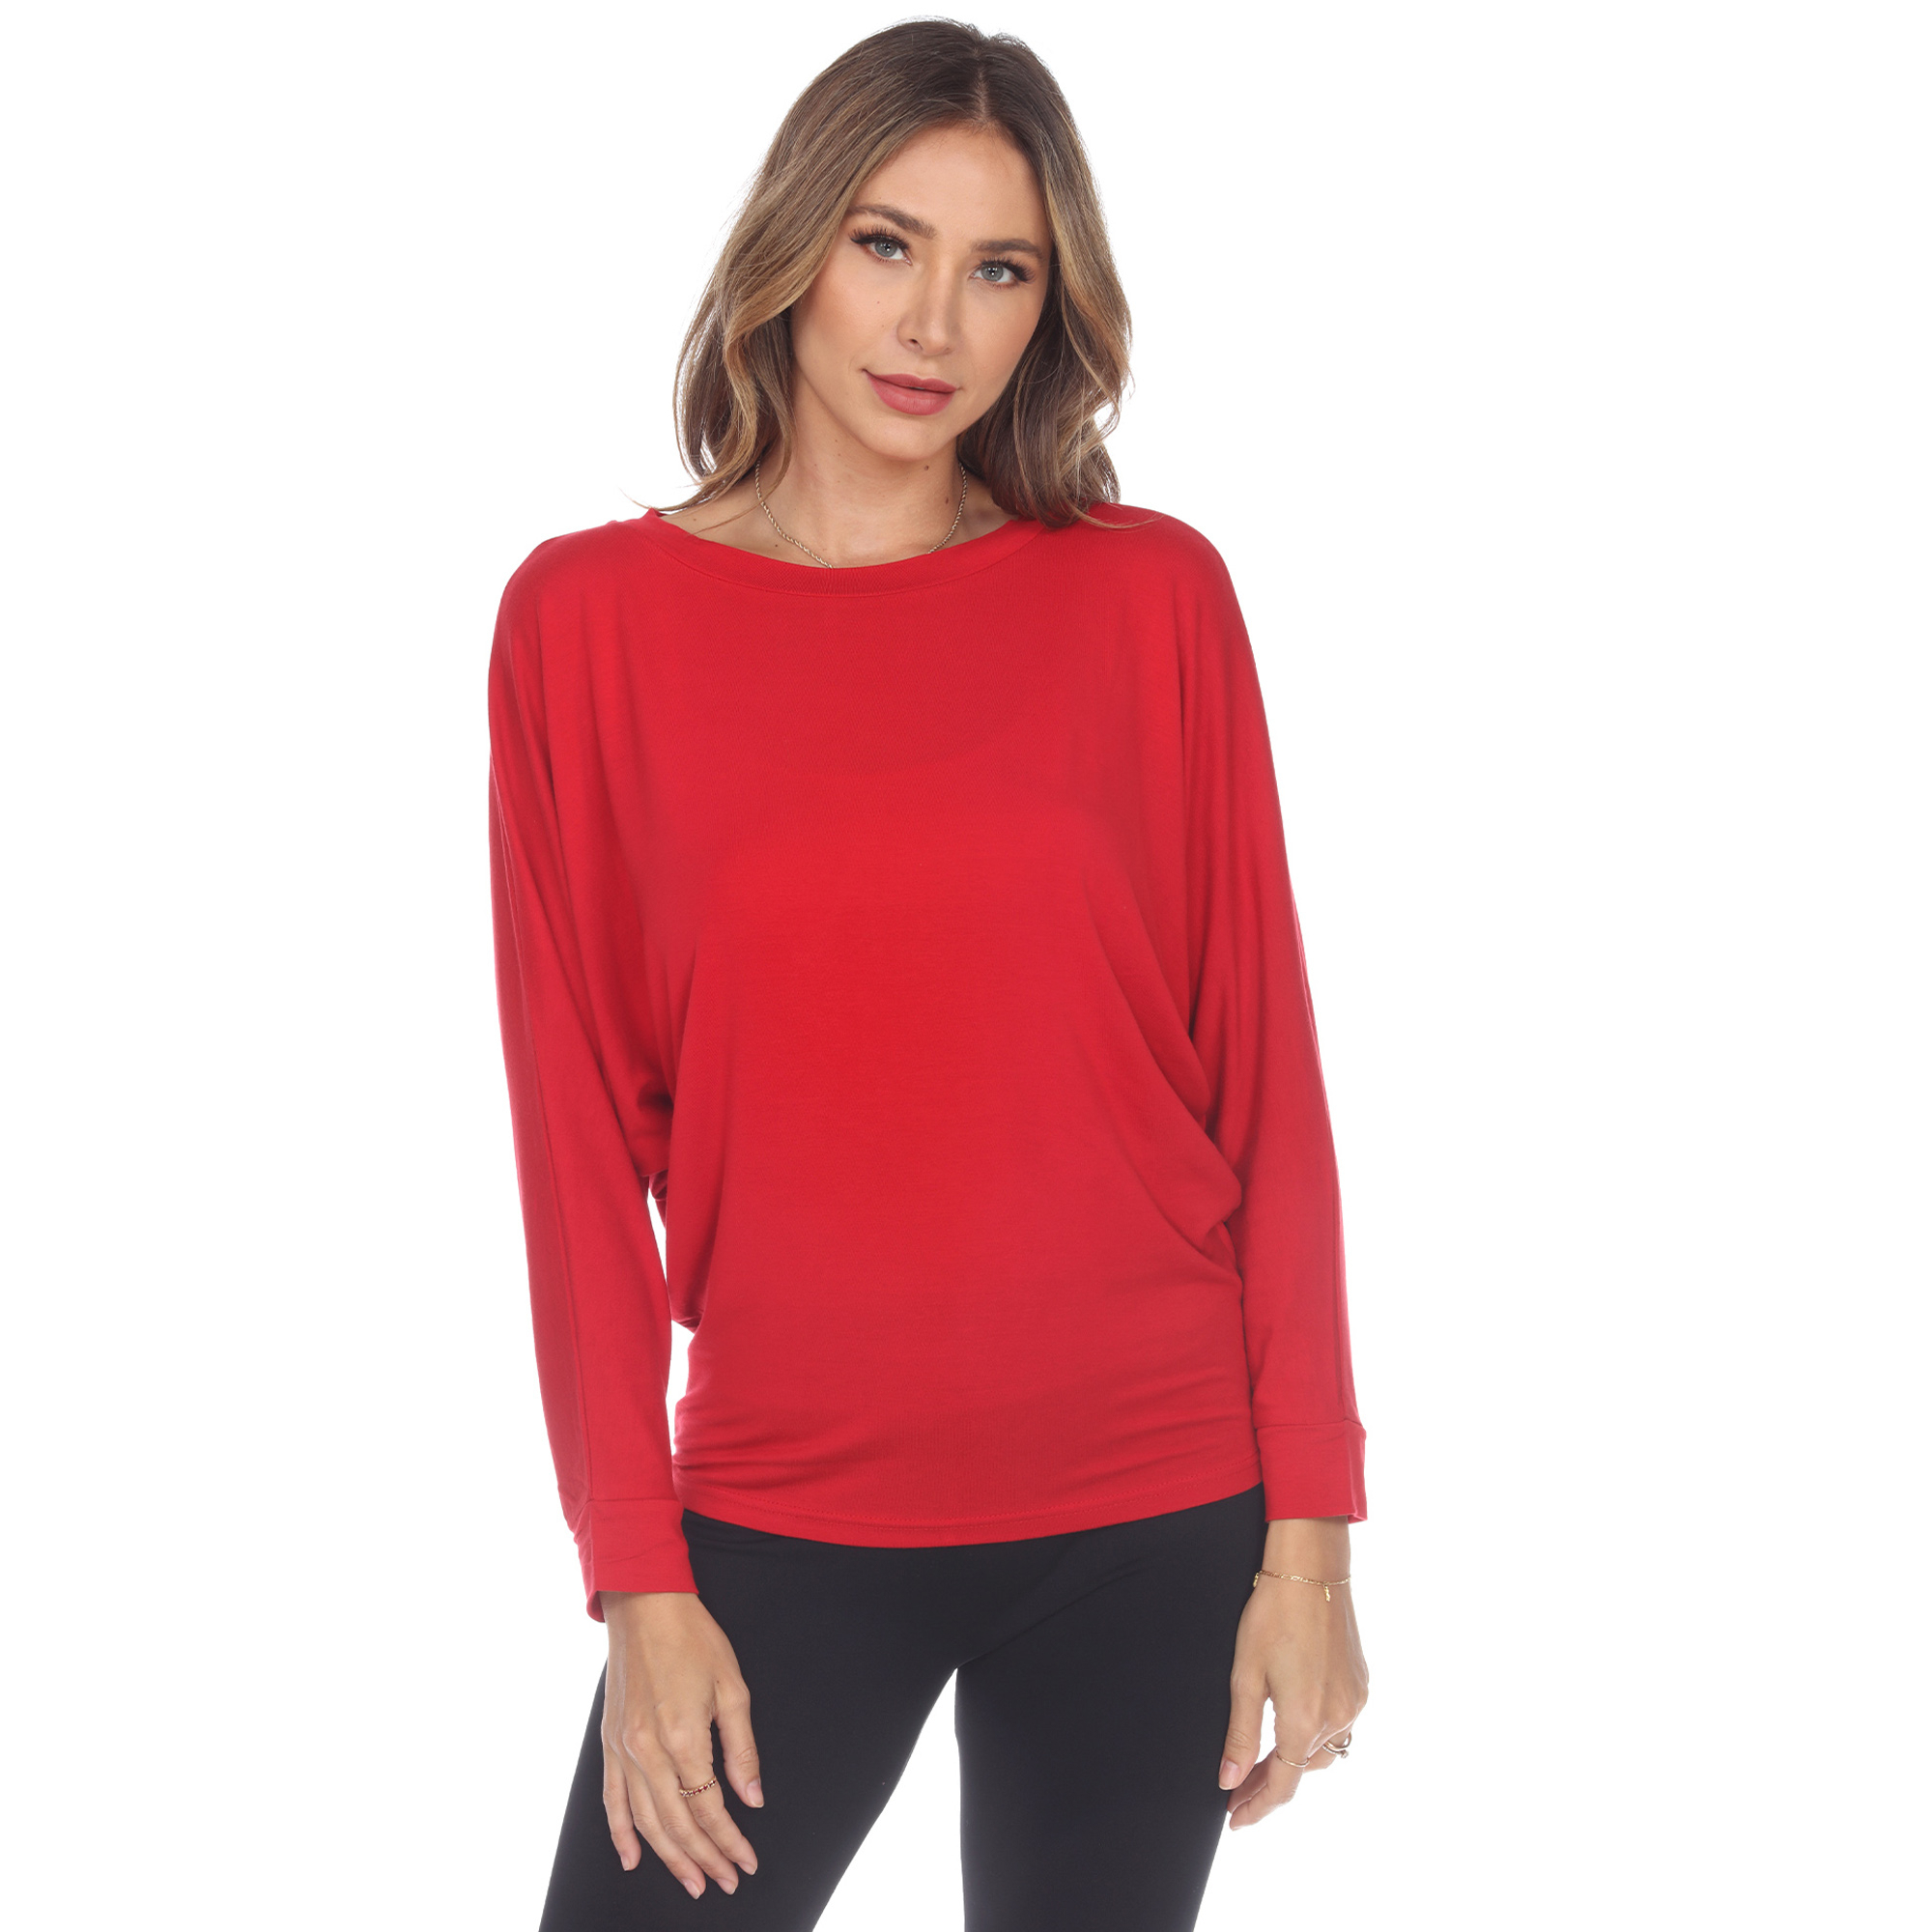 White Mark Women's Banded Dolman Top - Red, Small